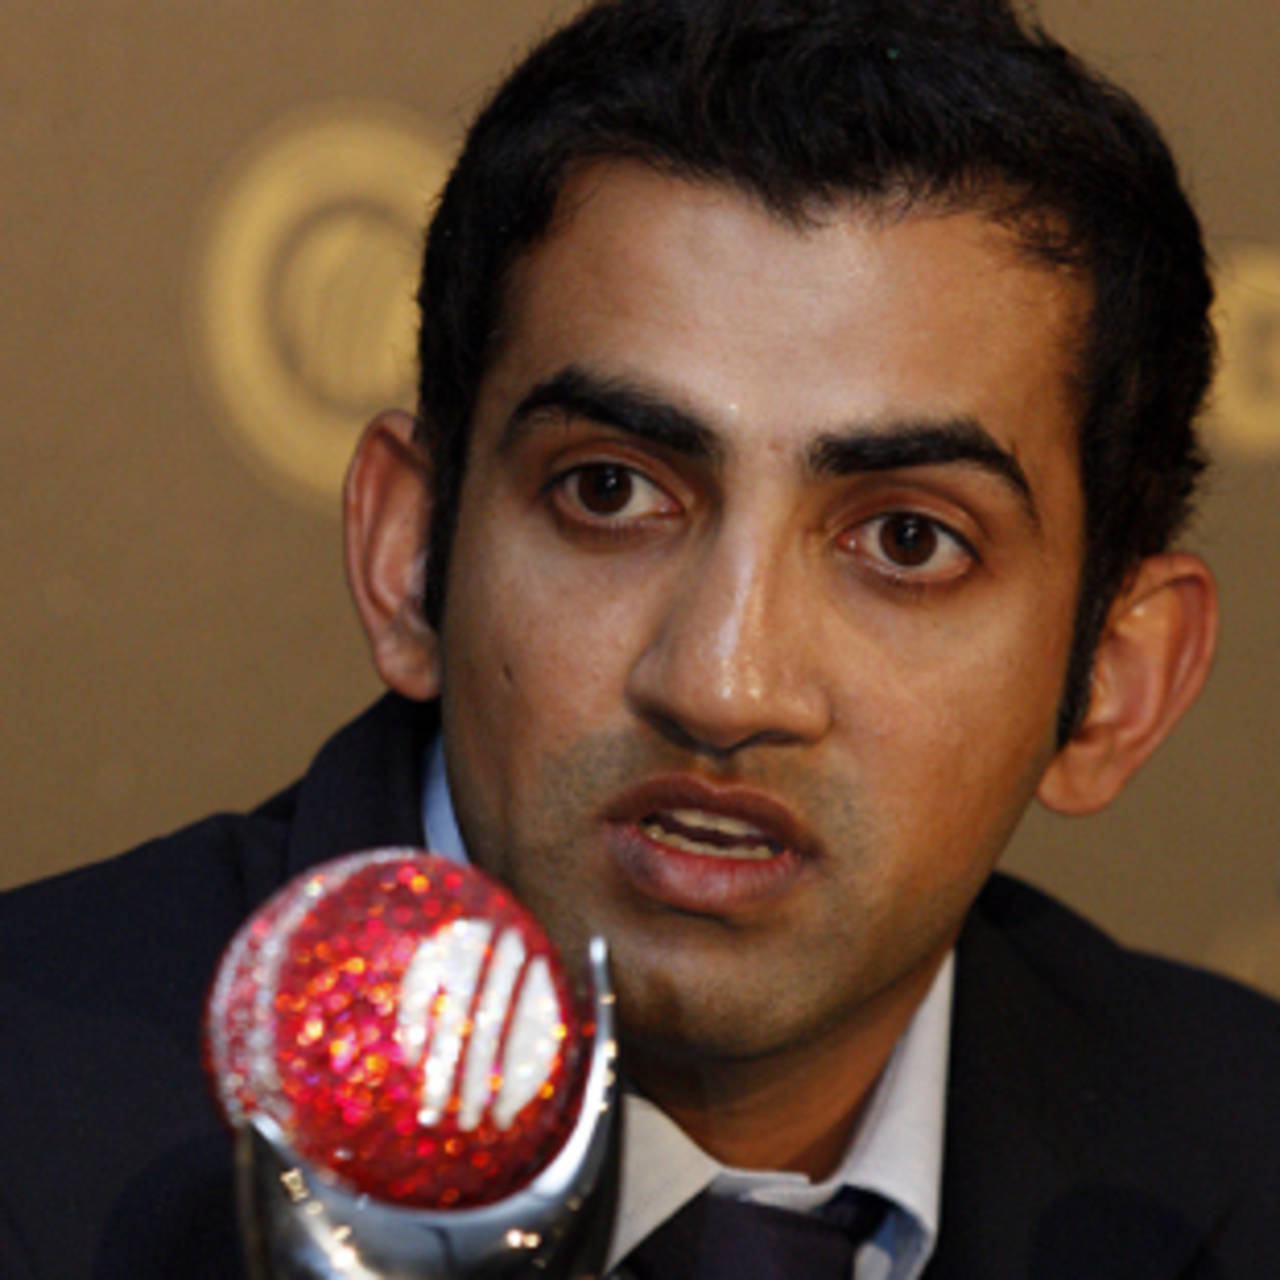 Gautam Gambhir speaks to the media after being named Test Player of the Year, ICC Awards, Johannesburg, October 1, 2009